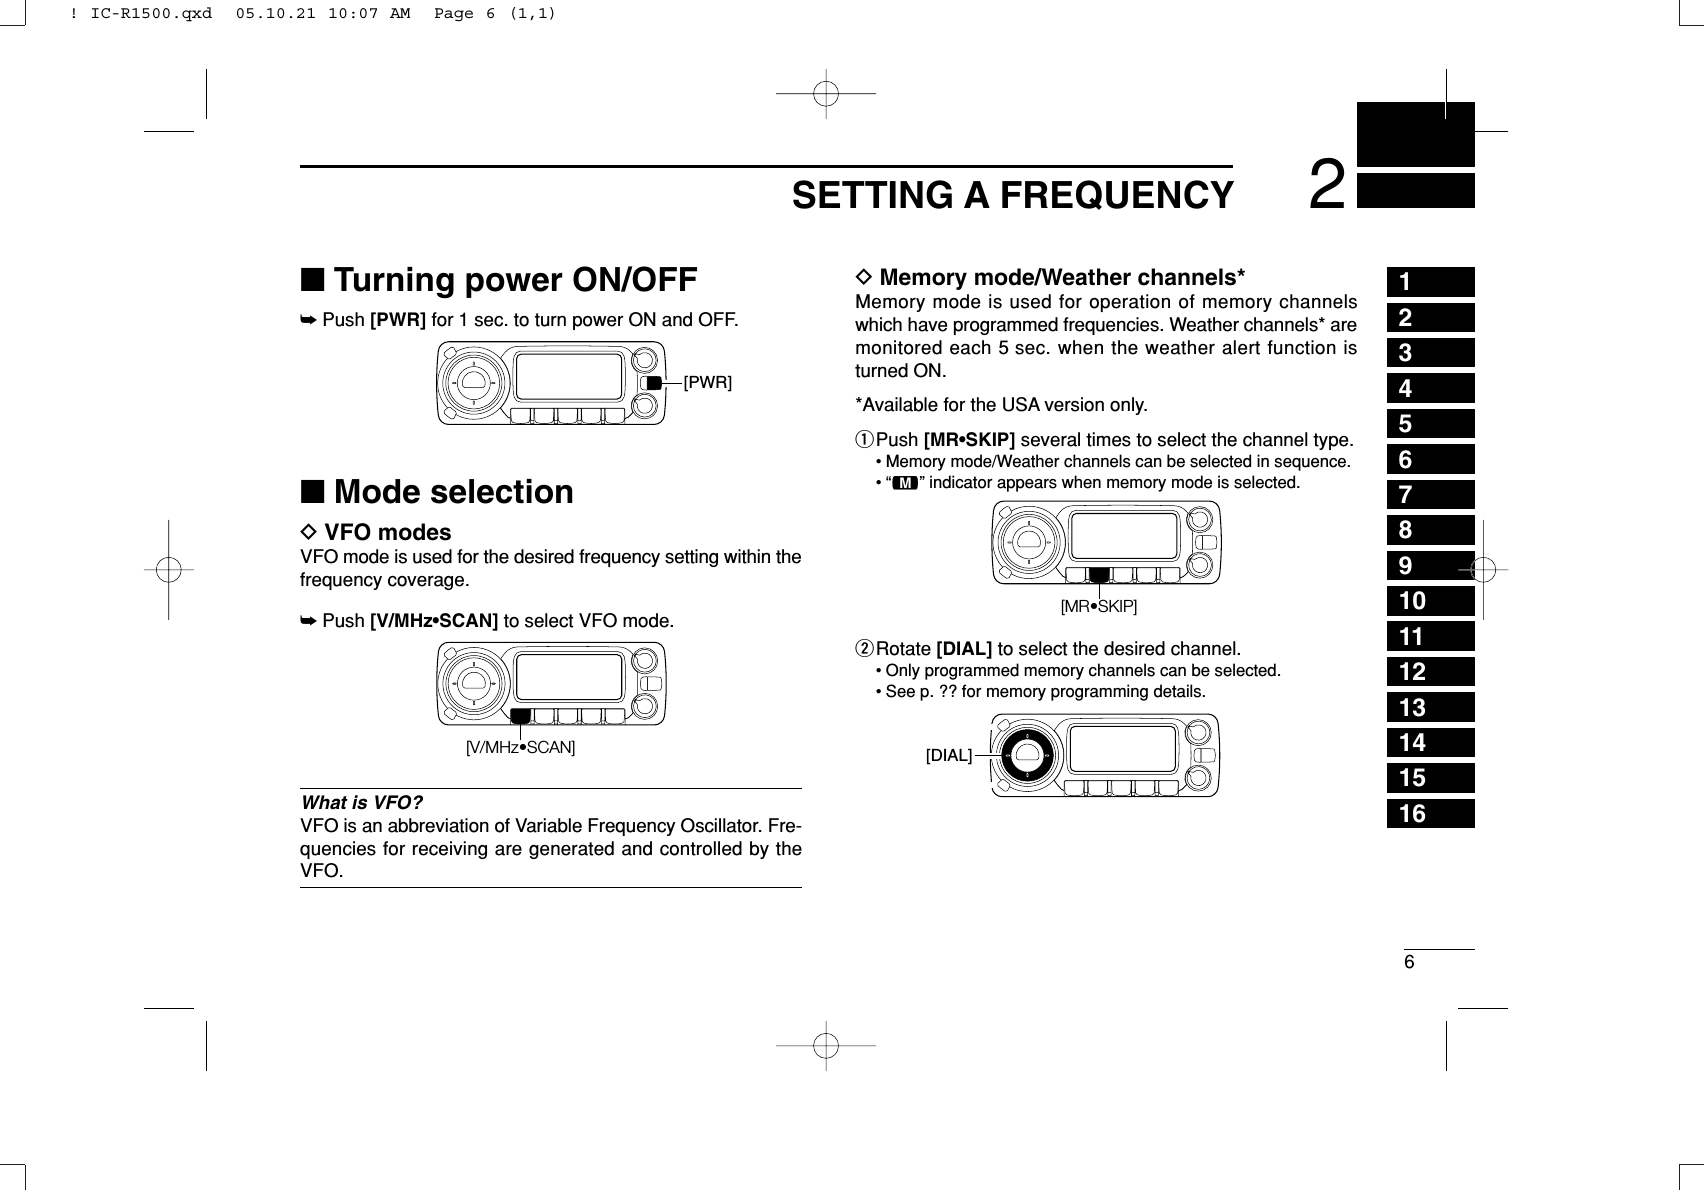 62SETTING A FREQUENCY12345678910111213141516■Turning power ON/OFF➥Push [PWR] for 1 sec. to turn power ON and OFF.■Mode selectionDVFO modesVFO mode is used for the desired frequency setting within thefrequency coverage.➥Push [V/MHz•SCAN] to select VFO mode.What is VFO?VFO is an abbreviation of Variable Frequency Oscillator. Fre-quencies for receiving are generated and controlled by theVFO.DMemory mode/Weather channels*Memory mode is used for operation of memory channelswhich have programmed frequencies. Weather channels* aremonitored each 5 sec. when the weather alert function isturned ON.*Available for the USA version only.qPush [MR•SKIP] several times to select the channel type.• Memory mode/Weather channels can be selected in sequence.•“!” indicator appears when memory mode is selected.wRotate [DIAL] to select the desired channel.• Only programmed memory channels can be selected.• See p. ?? for memory programming details.[DIAL][MR•SKIP][V/MHz•SCAN][PWR]! IC-R1500.qxd  05.10.21 10:07 AM  Page 6 (1,1)